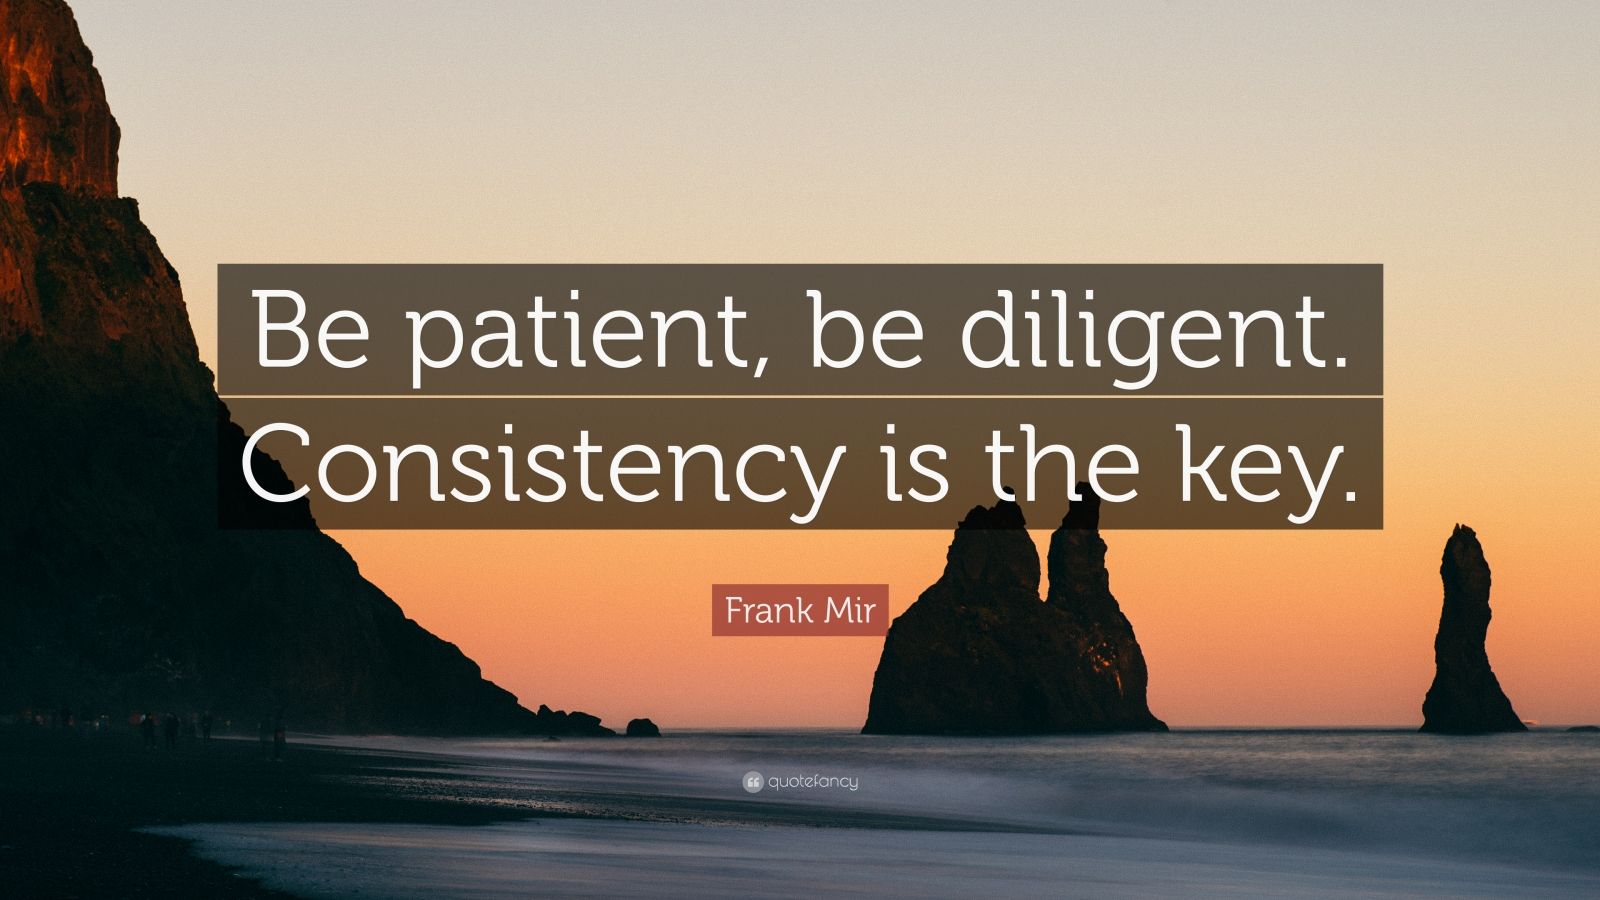 Frank Mir Quote: “Be patient, be diligent. Consistency is the key.” (12 ...